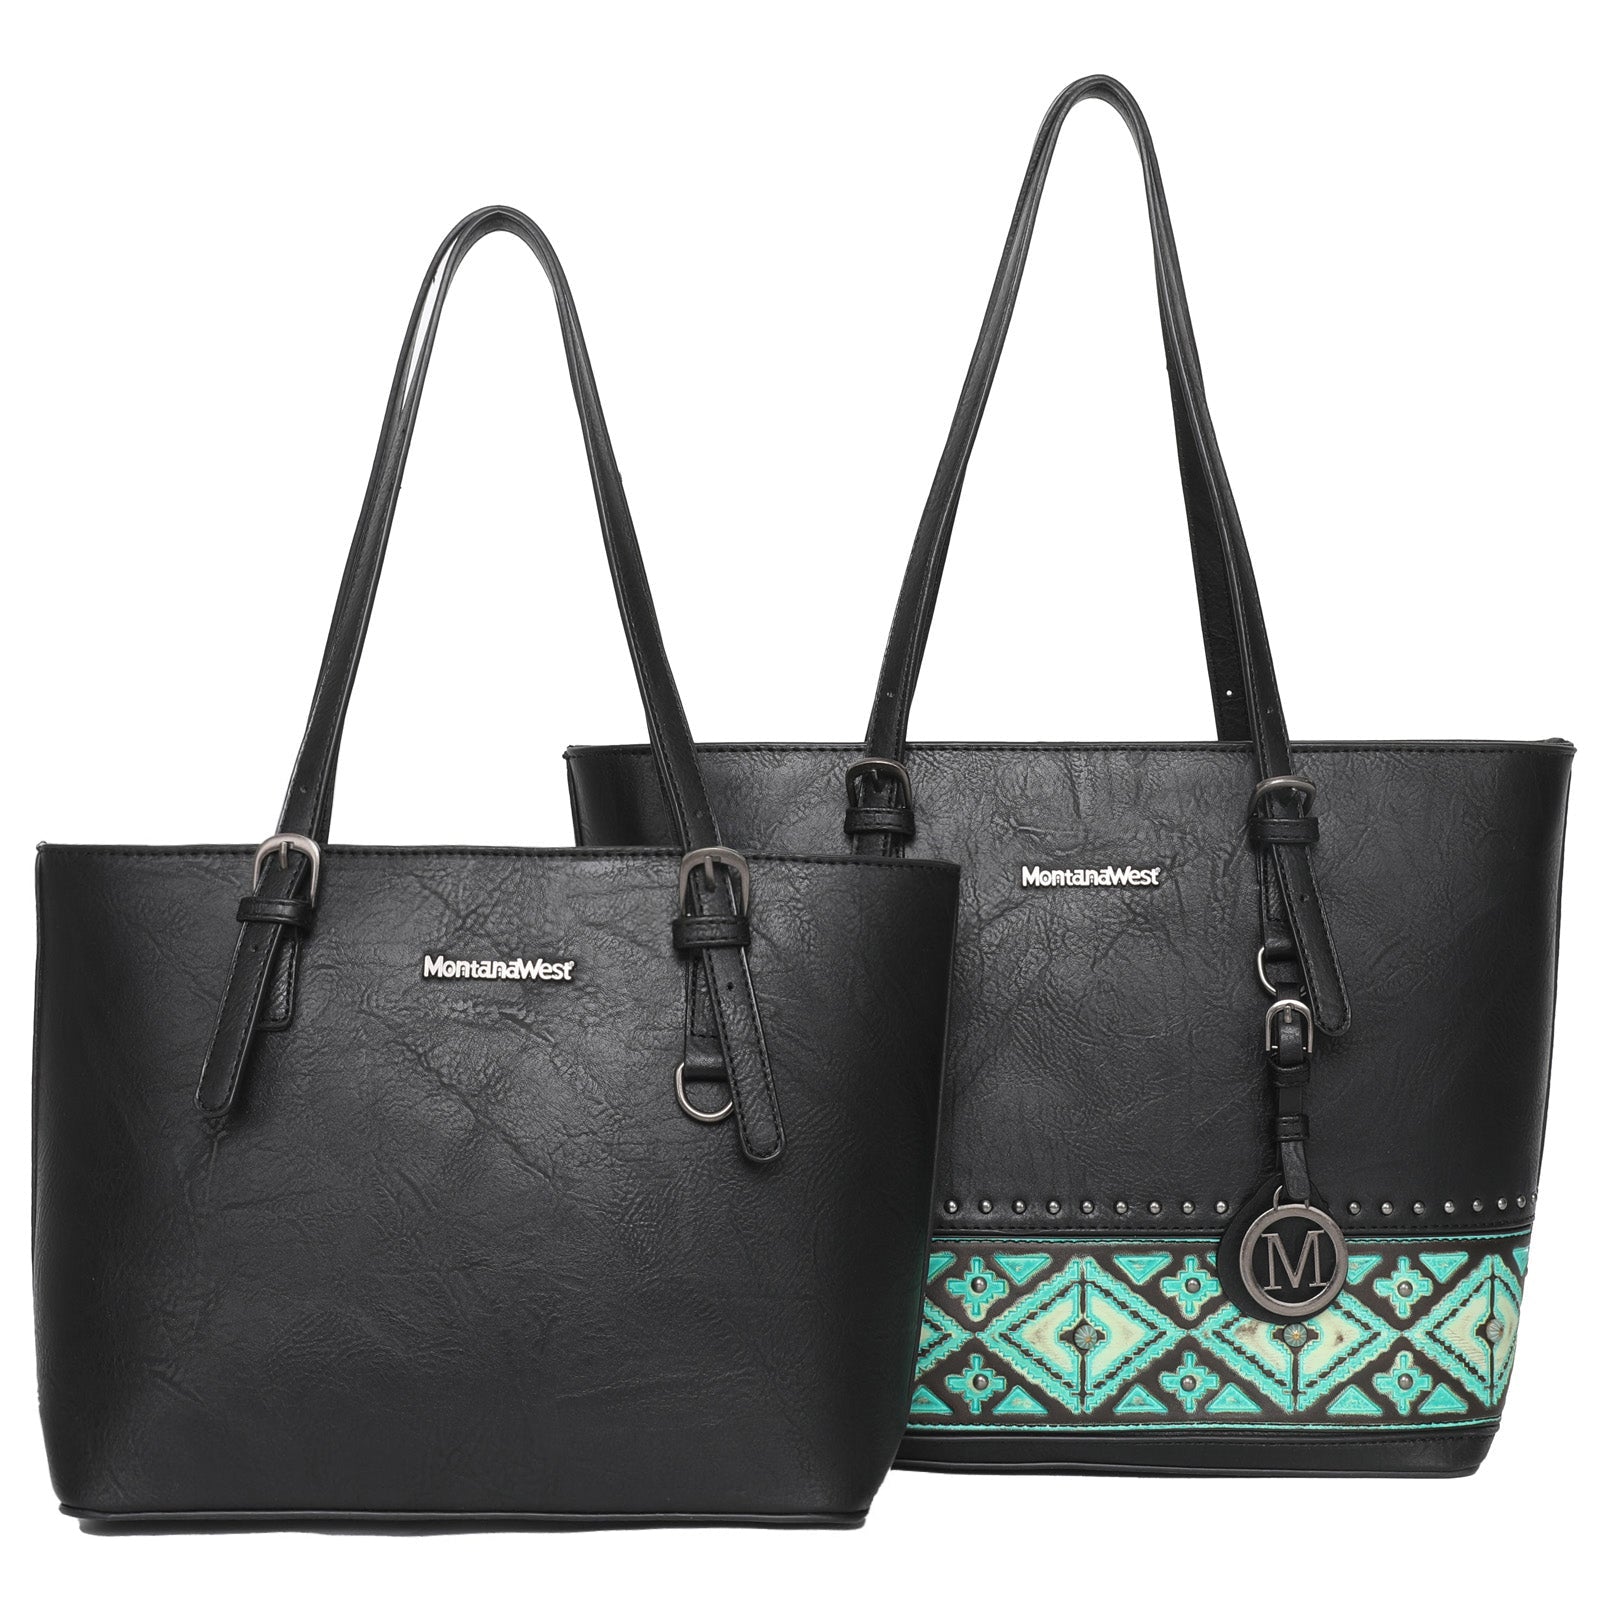 Montana West 2pcs Tote Bag Set (Concealed Carry Aztec Tote & Small Basic Tote) - Cowgirl Wear